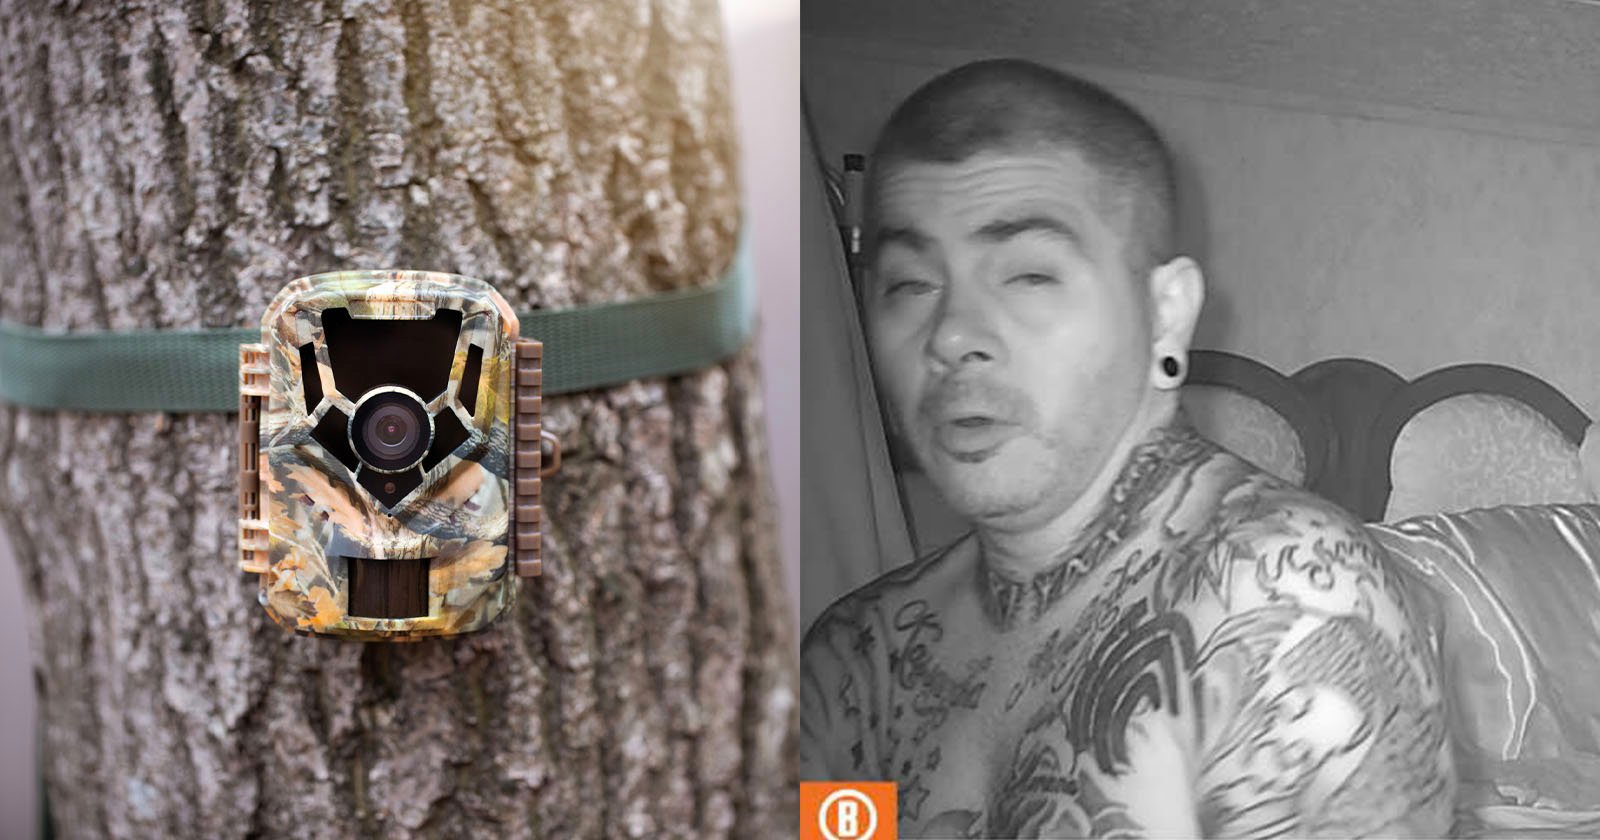 Thief Steals City Trail Camera, Gets Secretly Photographed in His Bedroom